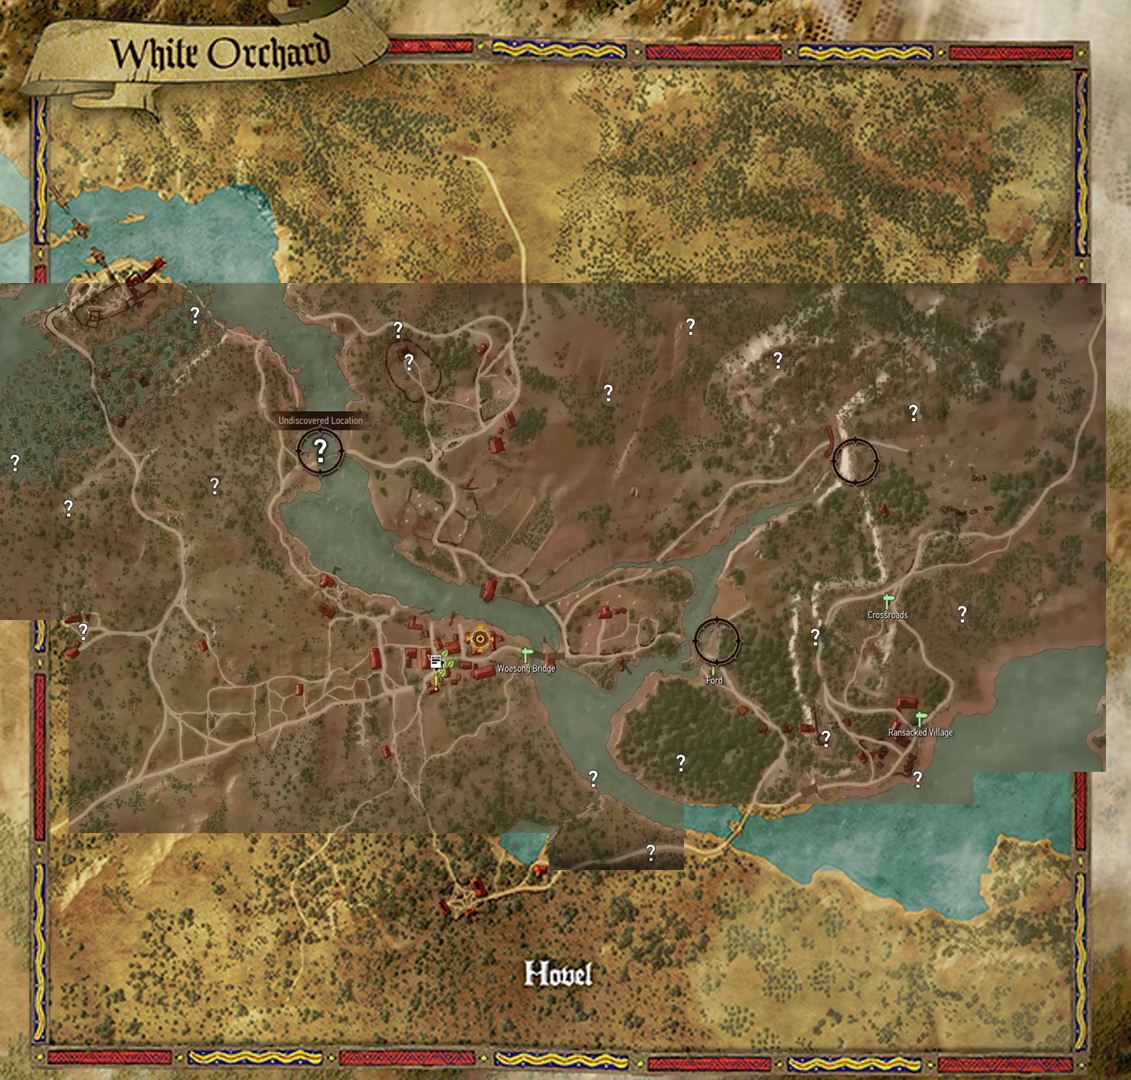 Witcher 3 Map Size Compared To Gta5 Skyrim Far Cry 4 New Screens Show Different Visual Settings